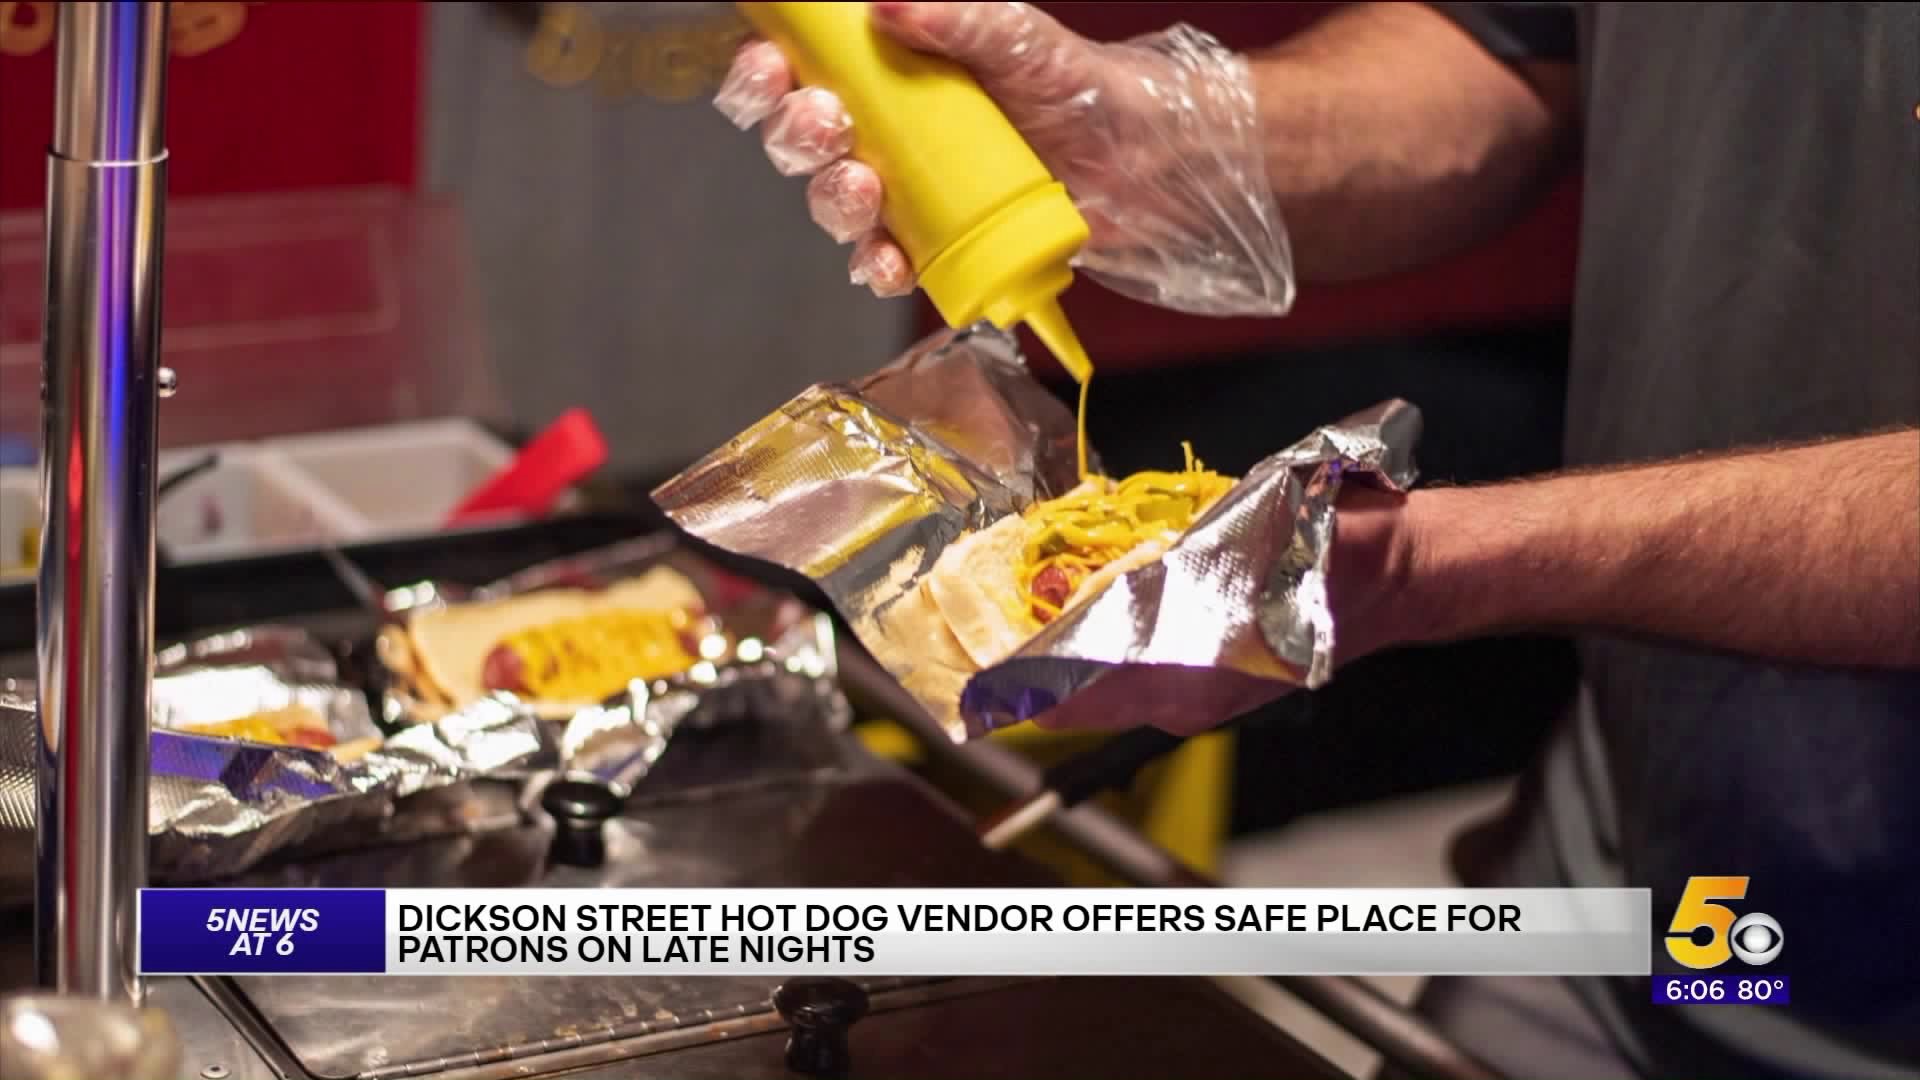 Local Business Owner Makes His Hot Dog Stand A "Safe Place"